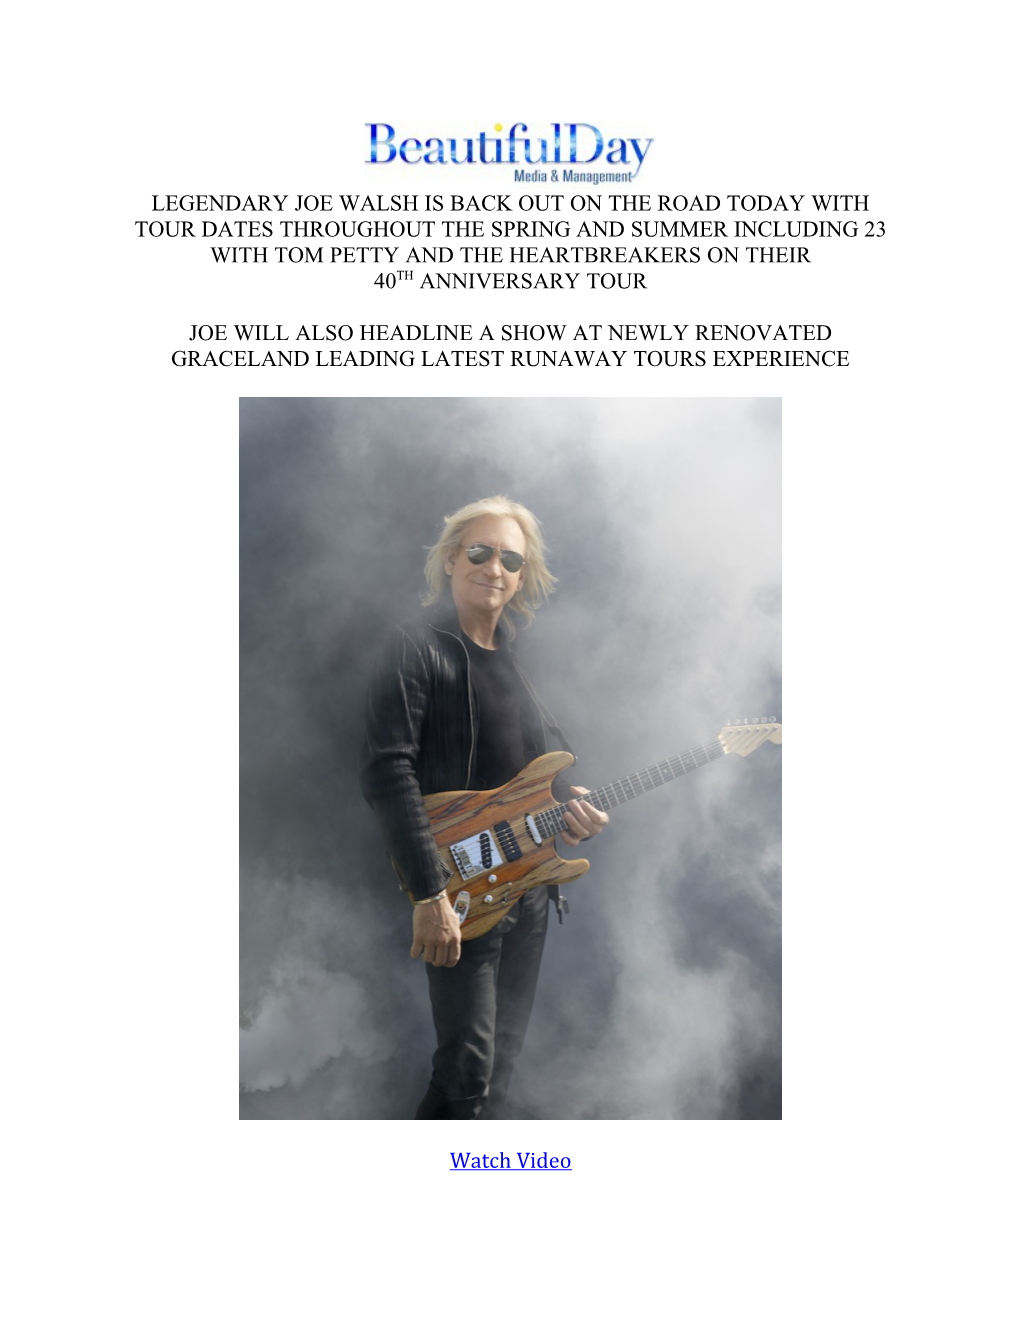 Joe Will Also Headline a Show at Newly Renovated Graceland Leading Latest Runaway Tours